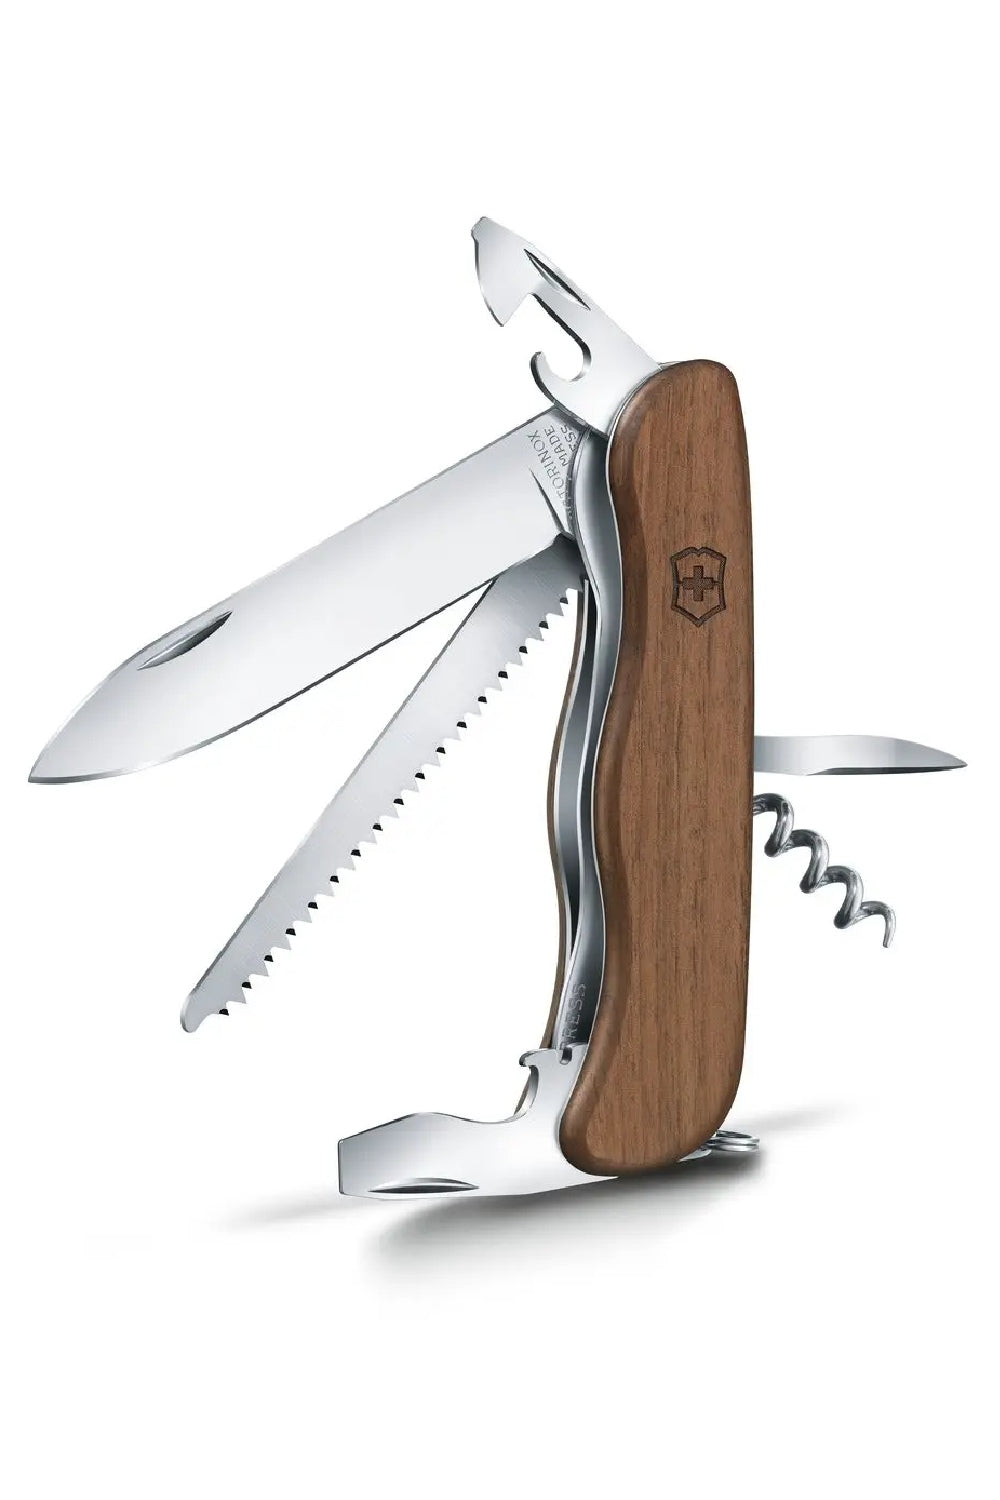 Victorinox Forester Wood Swiss Army Large Pocket Knife in Walnut Wood